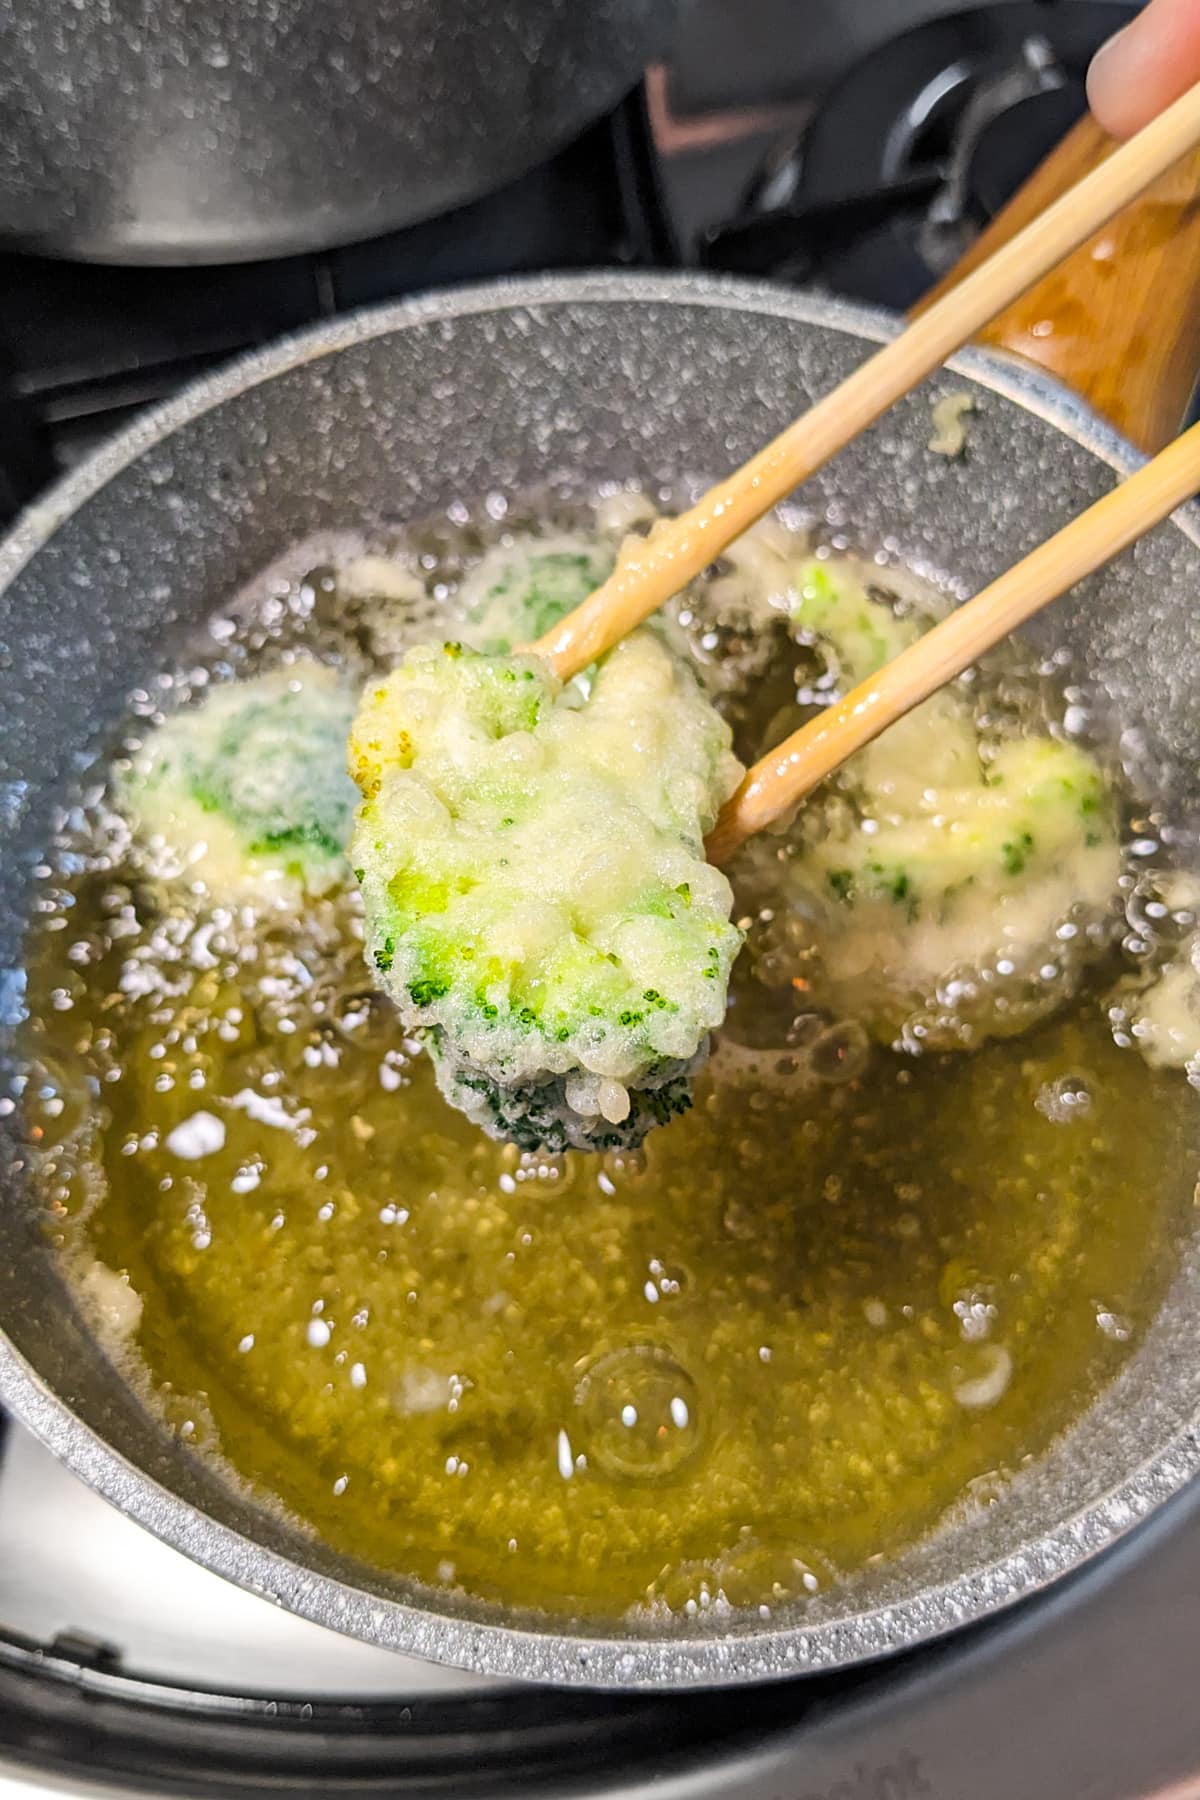 Two wooden sticks holding tempura broccoli over a pan with hot oil.